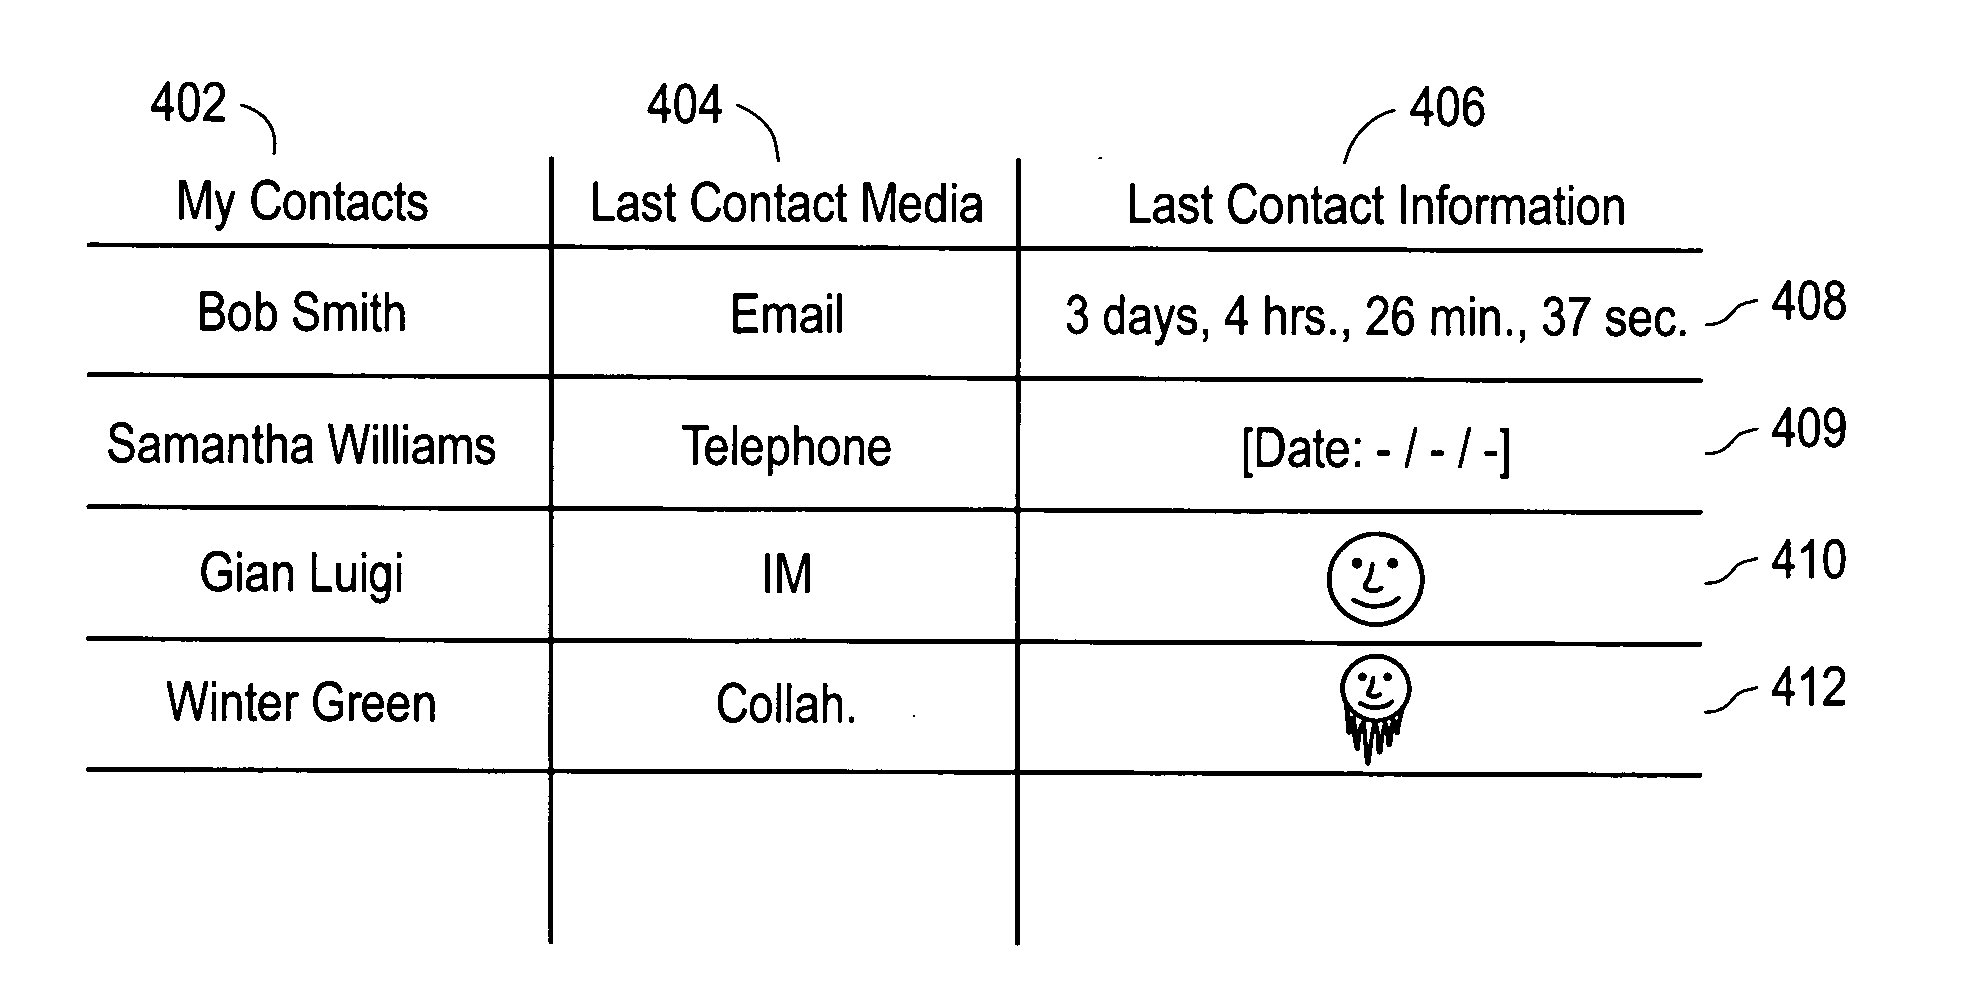 System and method for providing presence age information in a unified communication system